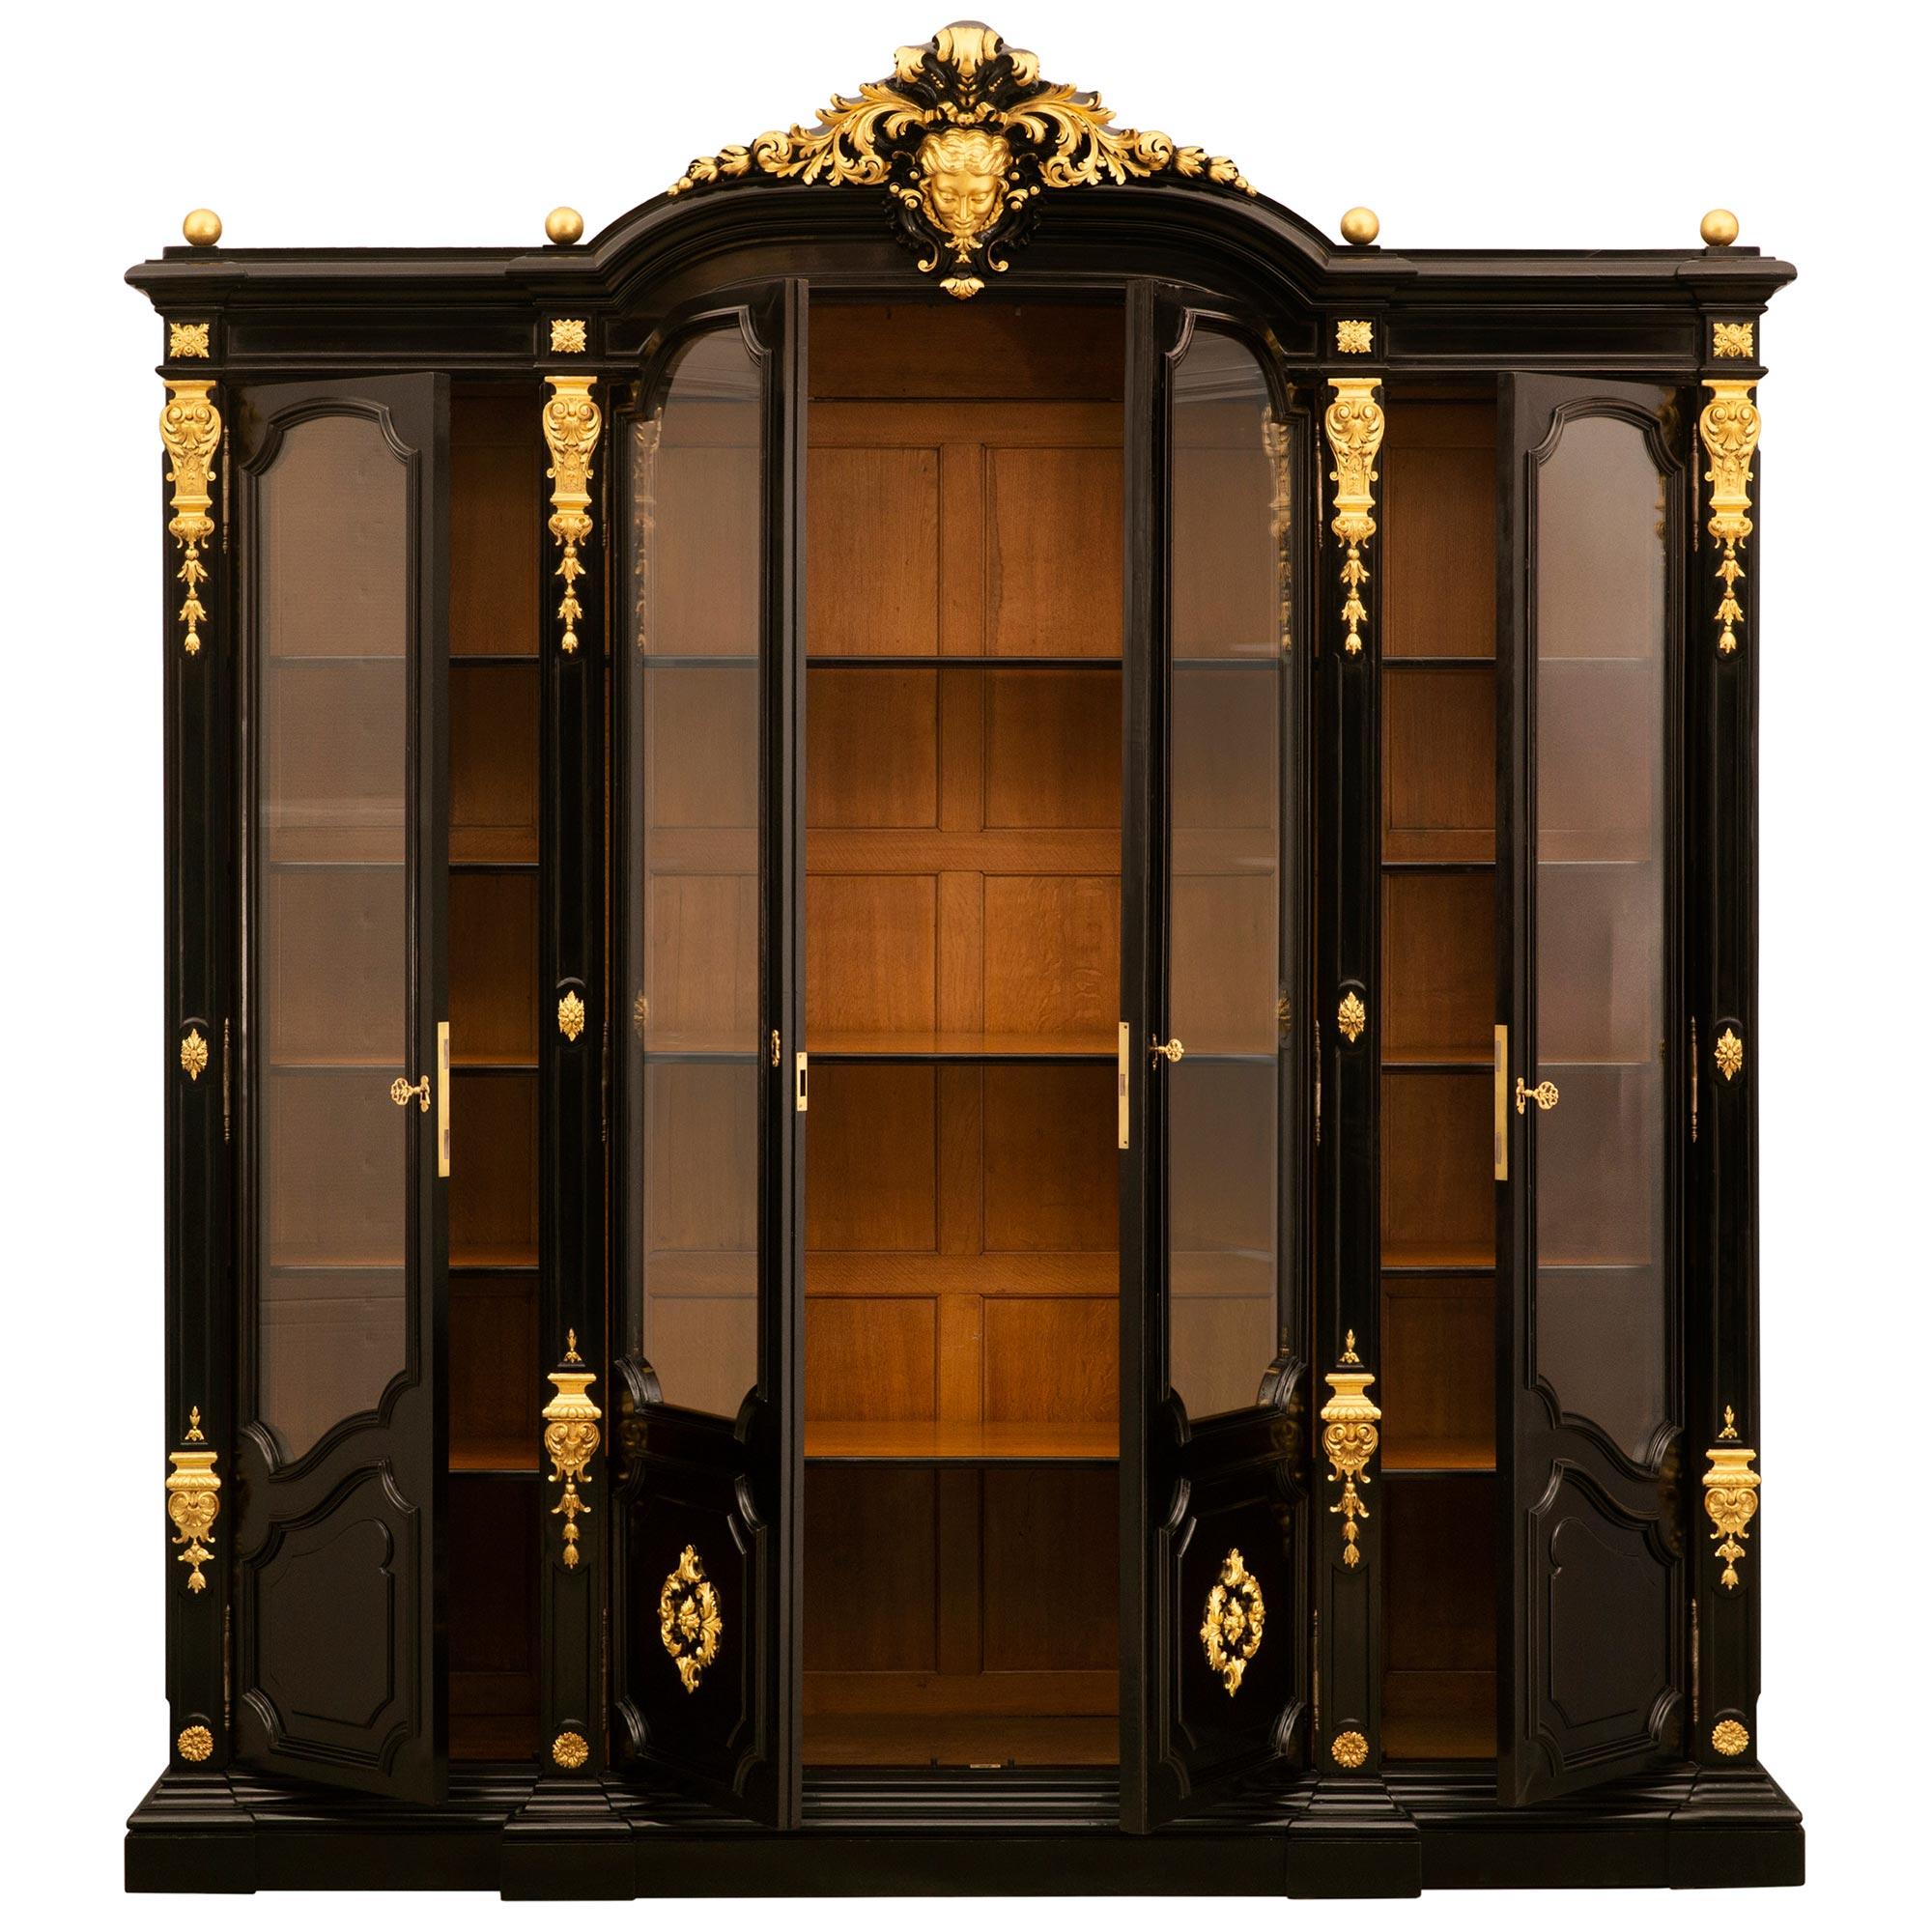 An Italian 19th century Rococo Revival st. ebonized giltwood vitrine In Good Condition For Sale In West Palm Beach, FL